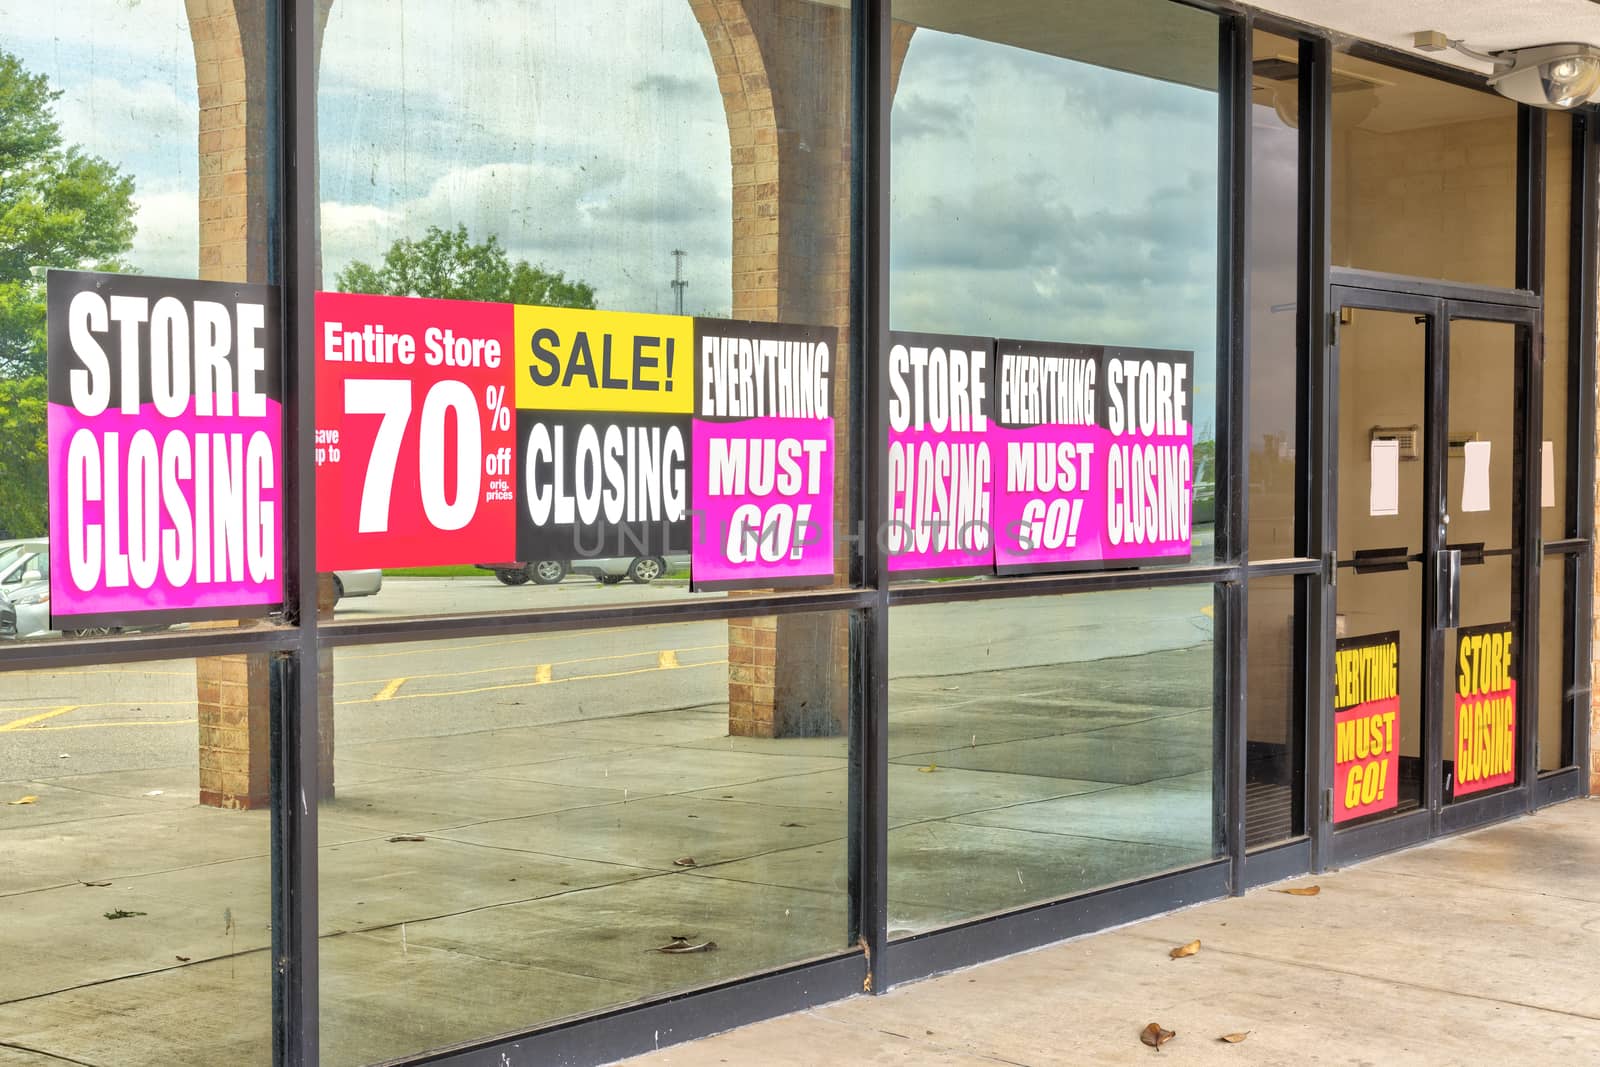 Going Out of Business Signs in Retail Store Windows by stockbuster1